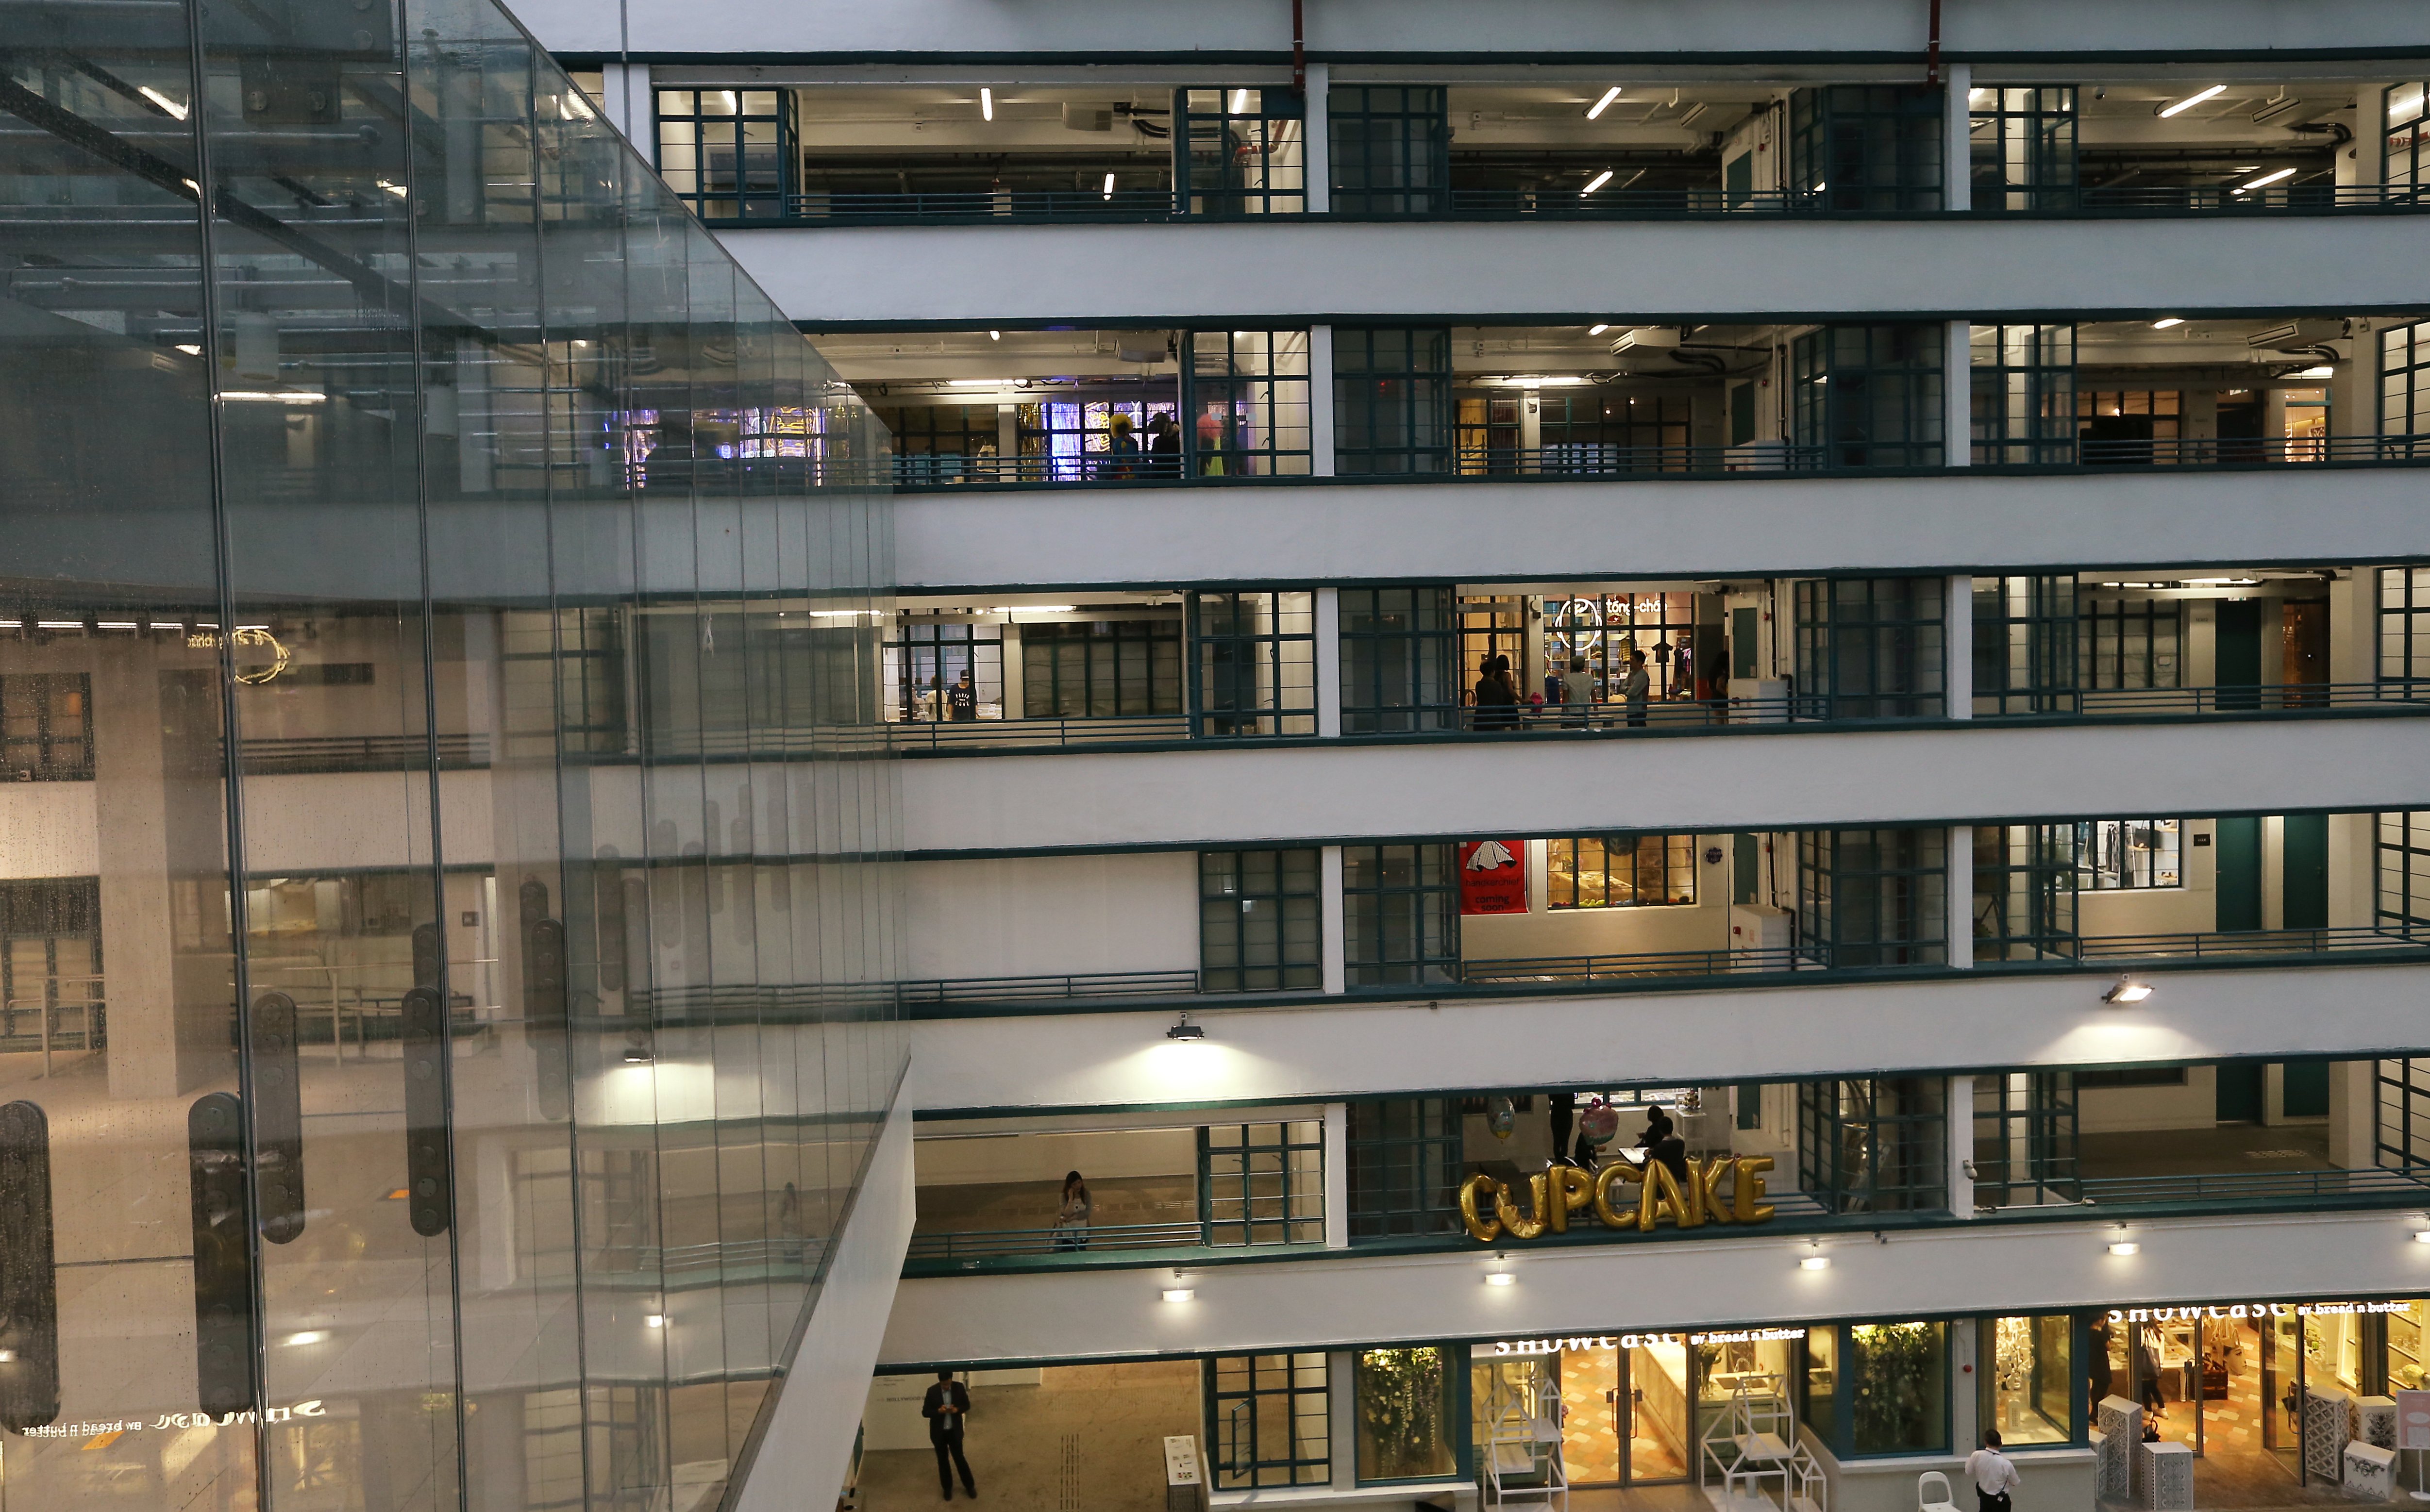 Even in start-up-friendly spaces like PMQ, many will face unaffordable rents and fierce competition. Photo" K. Y. Cheng 